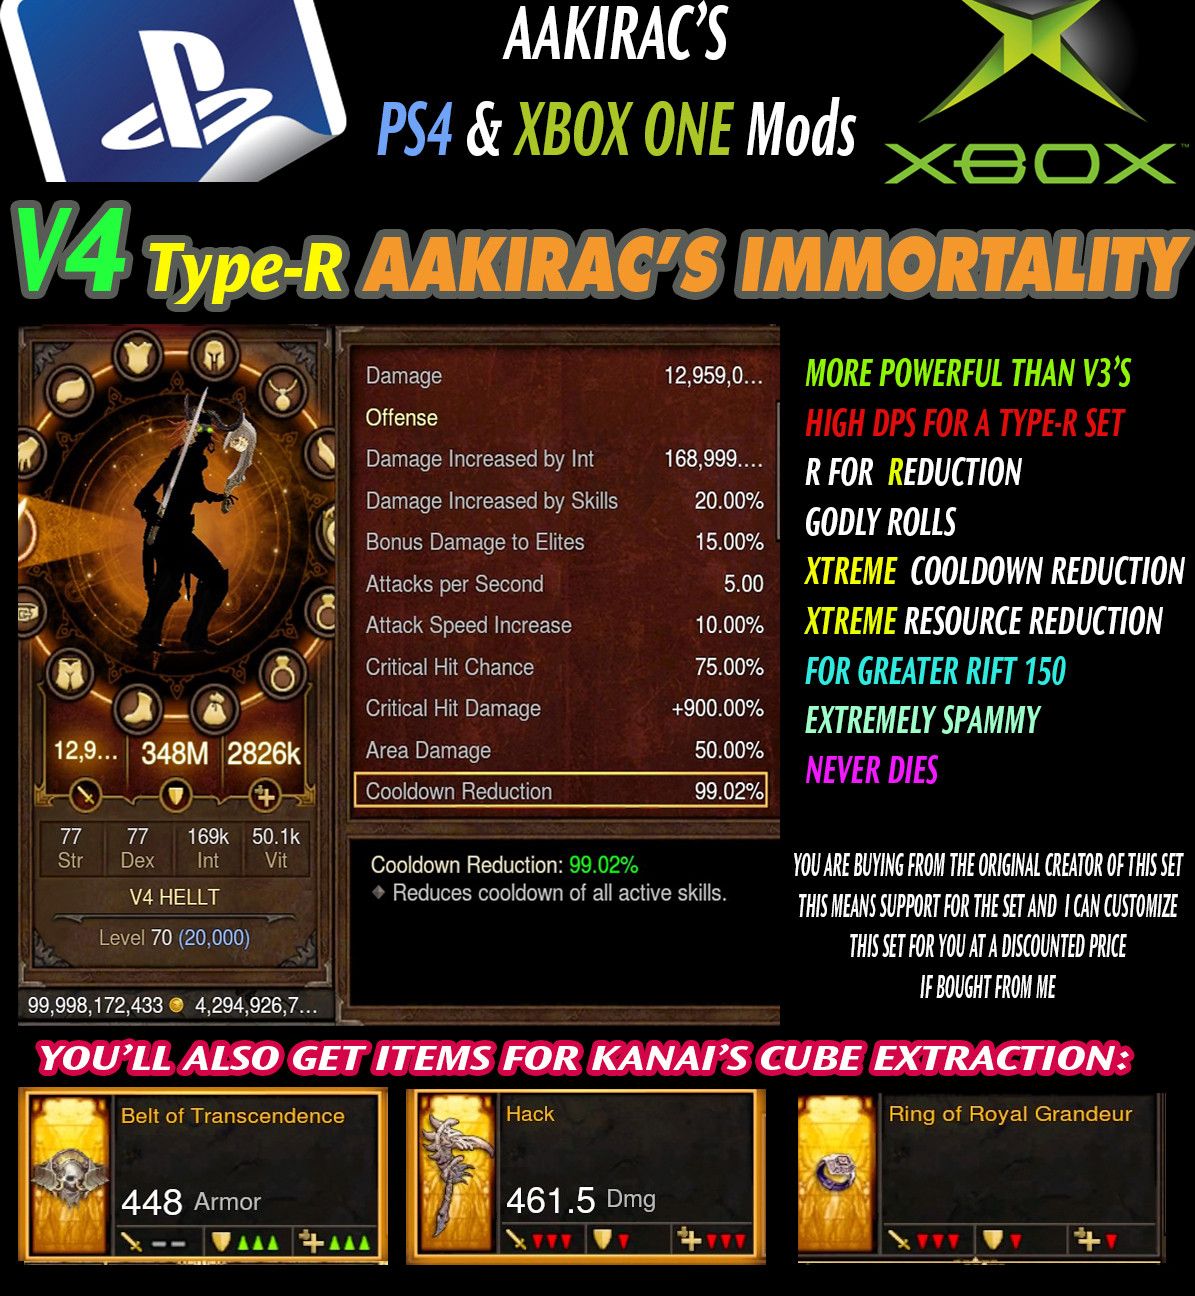 Diablo 3 Immortal v4 Type-R Anachyr Witch Doctor Modded Set for Rift 150 VooDoo Diablo 3 Mods ROS Seasonal and Non Seasonal Save Mod - Modded Items and Gear - Hacks - Cheats - Trainers for Playstation 4 - Playstation 5 - Nintendo Switch - Xbox One